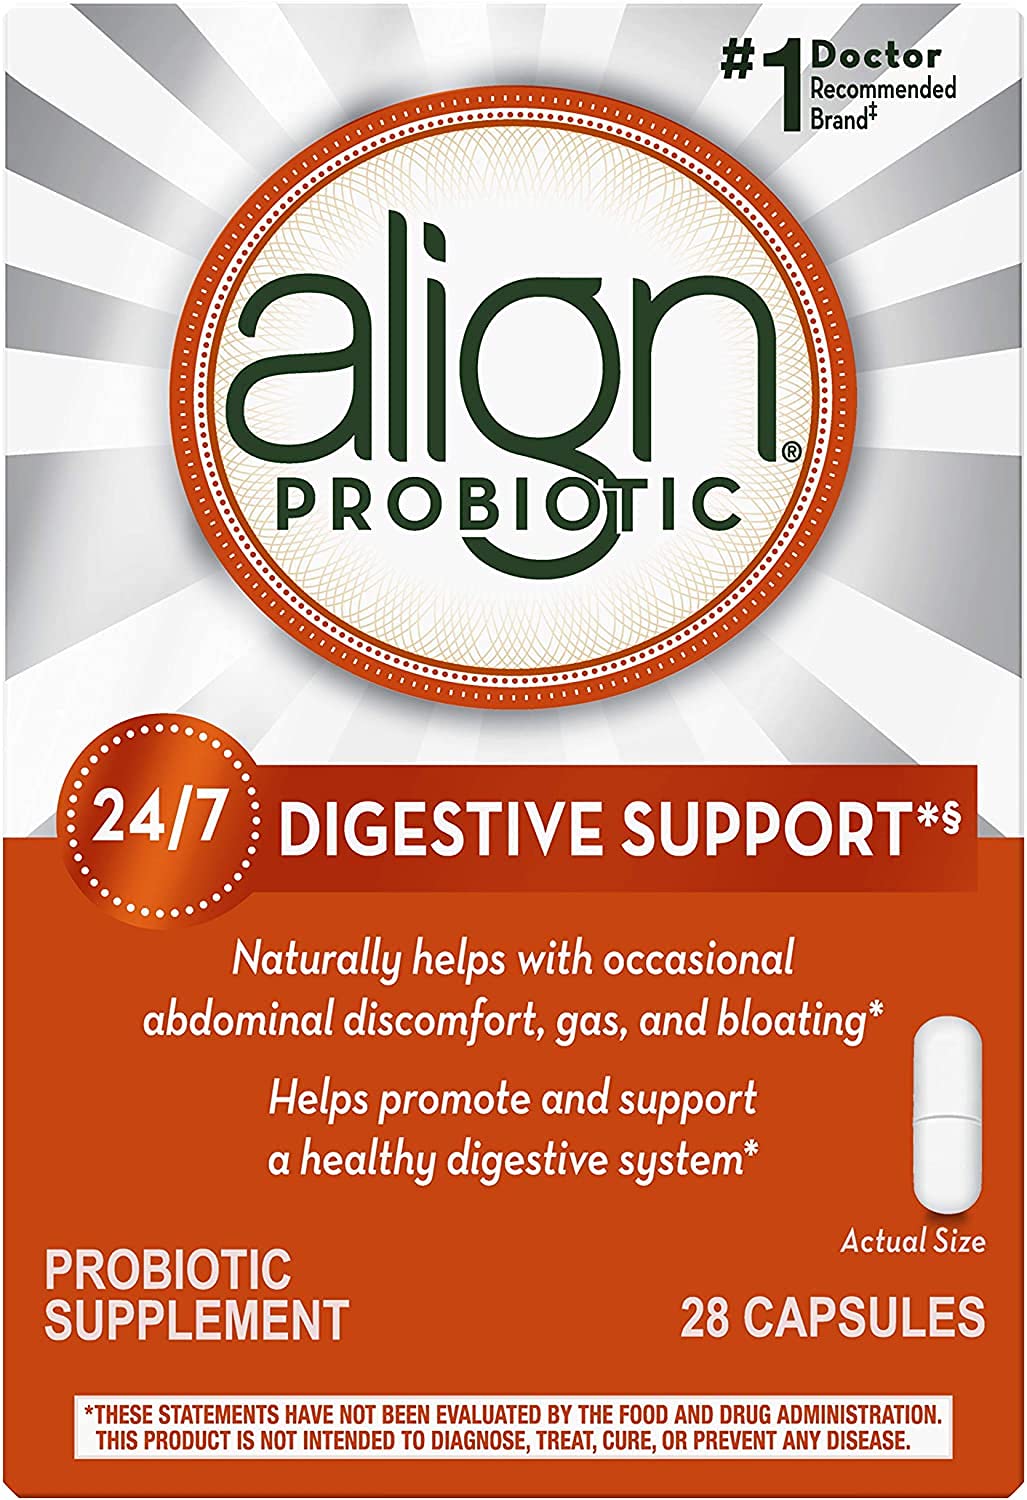 Align Probiotic, Probiotics for Women and Men, Daily Probiotic Supplement for Digestive Health*, #1 Recommended Probiotic by Doctors and Gastroenterologists, 28 Capsules